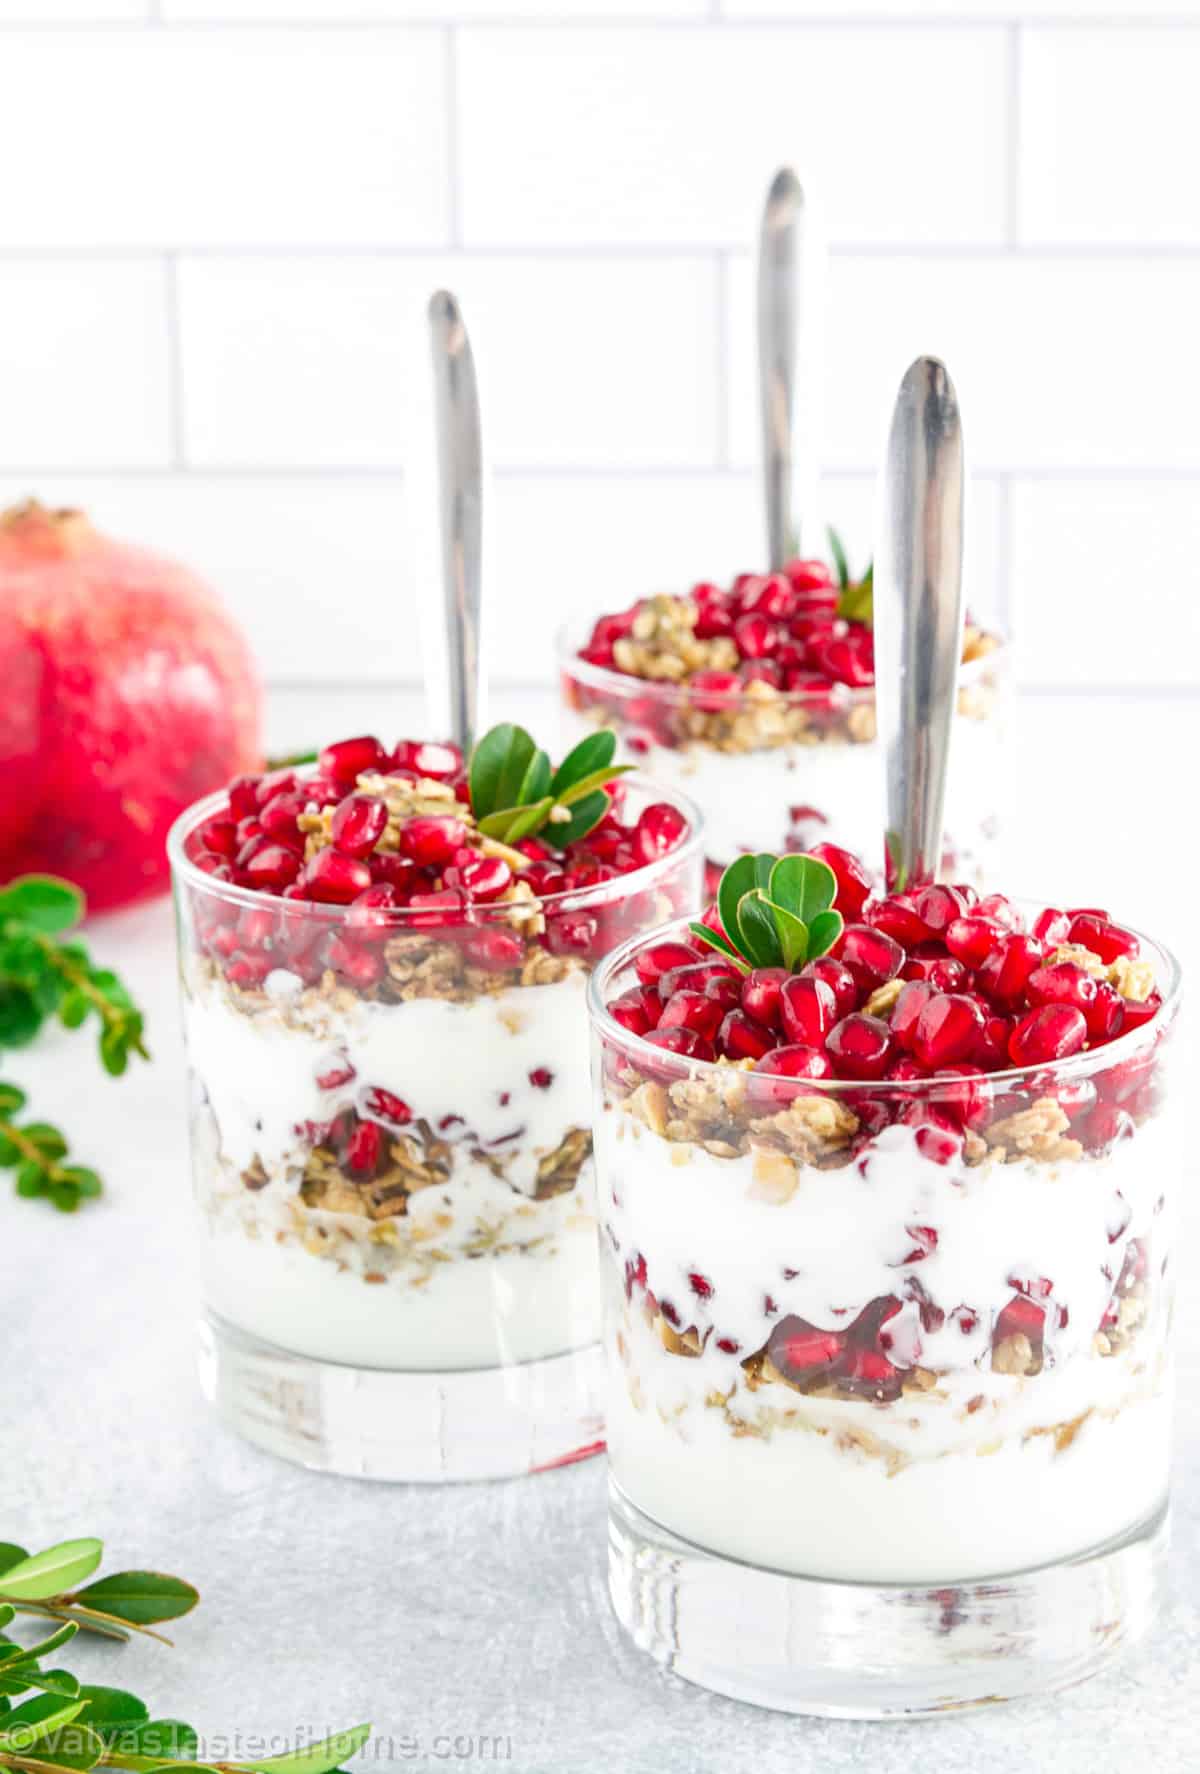 This Pomegranate Parfait is not only incredibly delicious but good for you too! It’s made using four simple ingredients for a dessert that’s creamy, crunchy, sweet, and tangy!